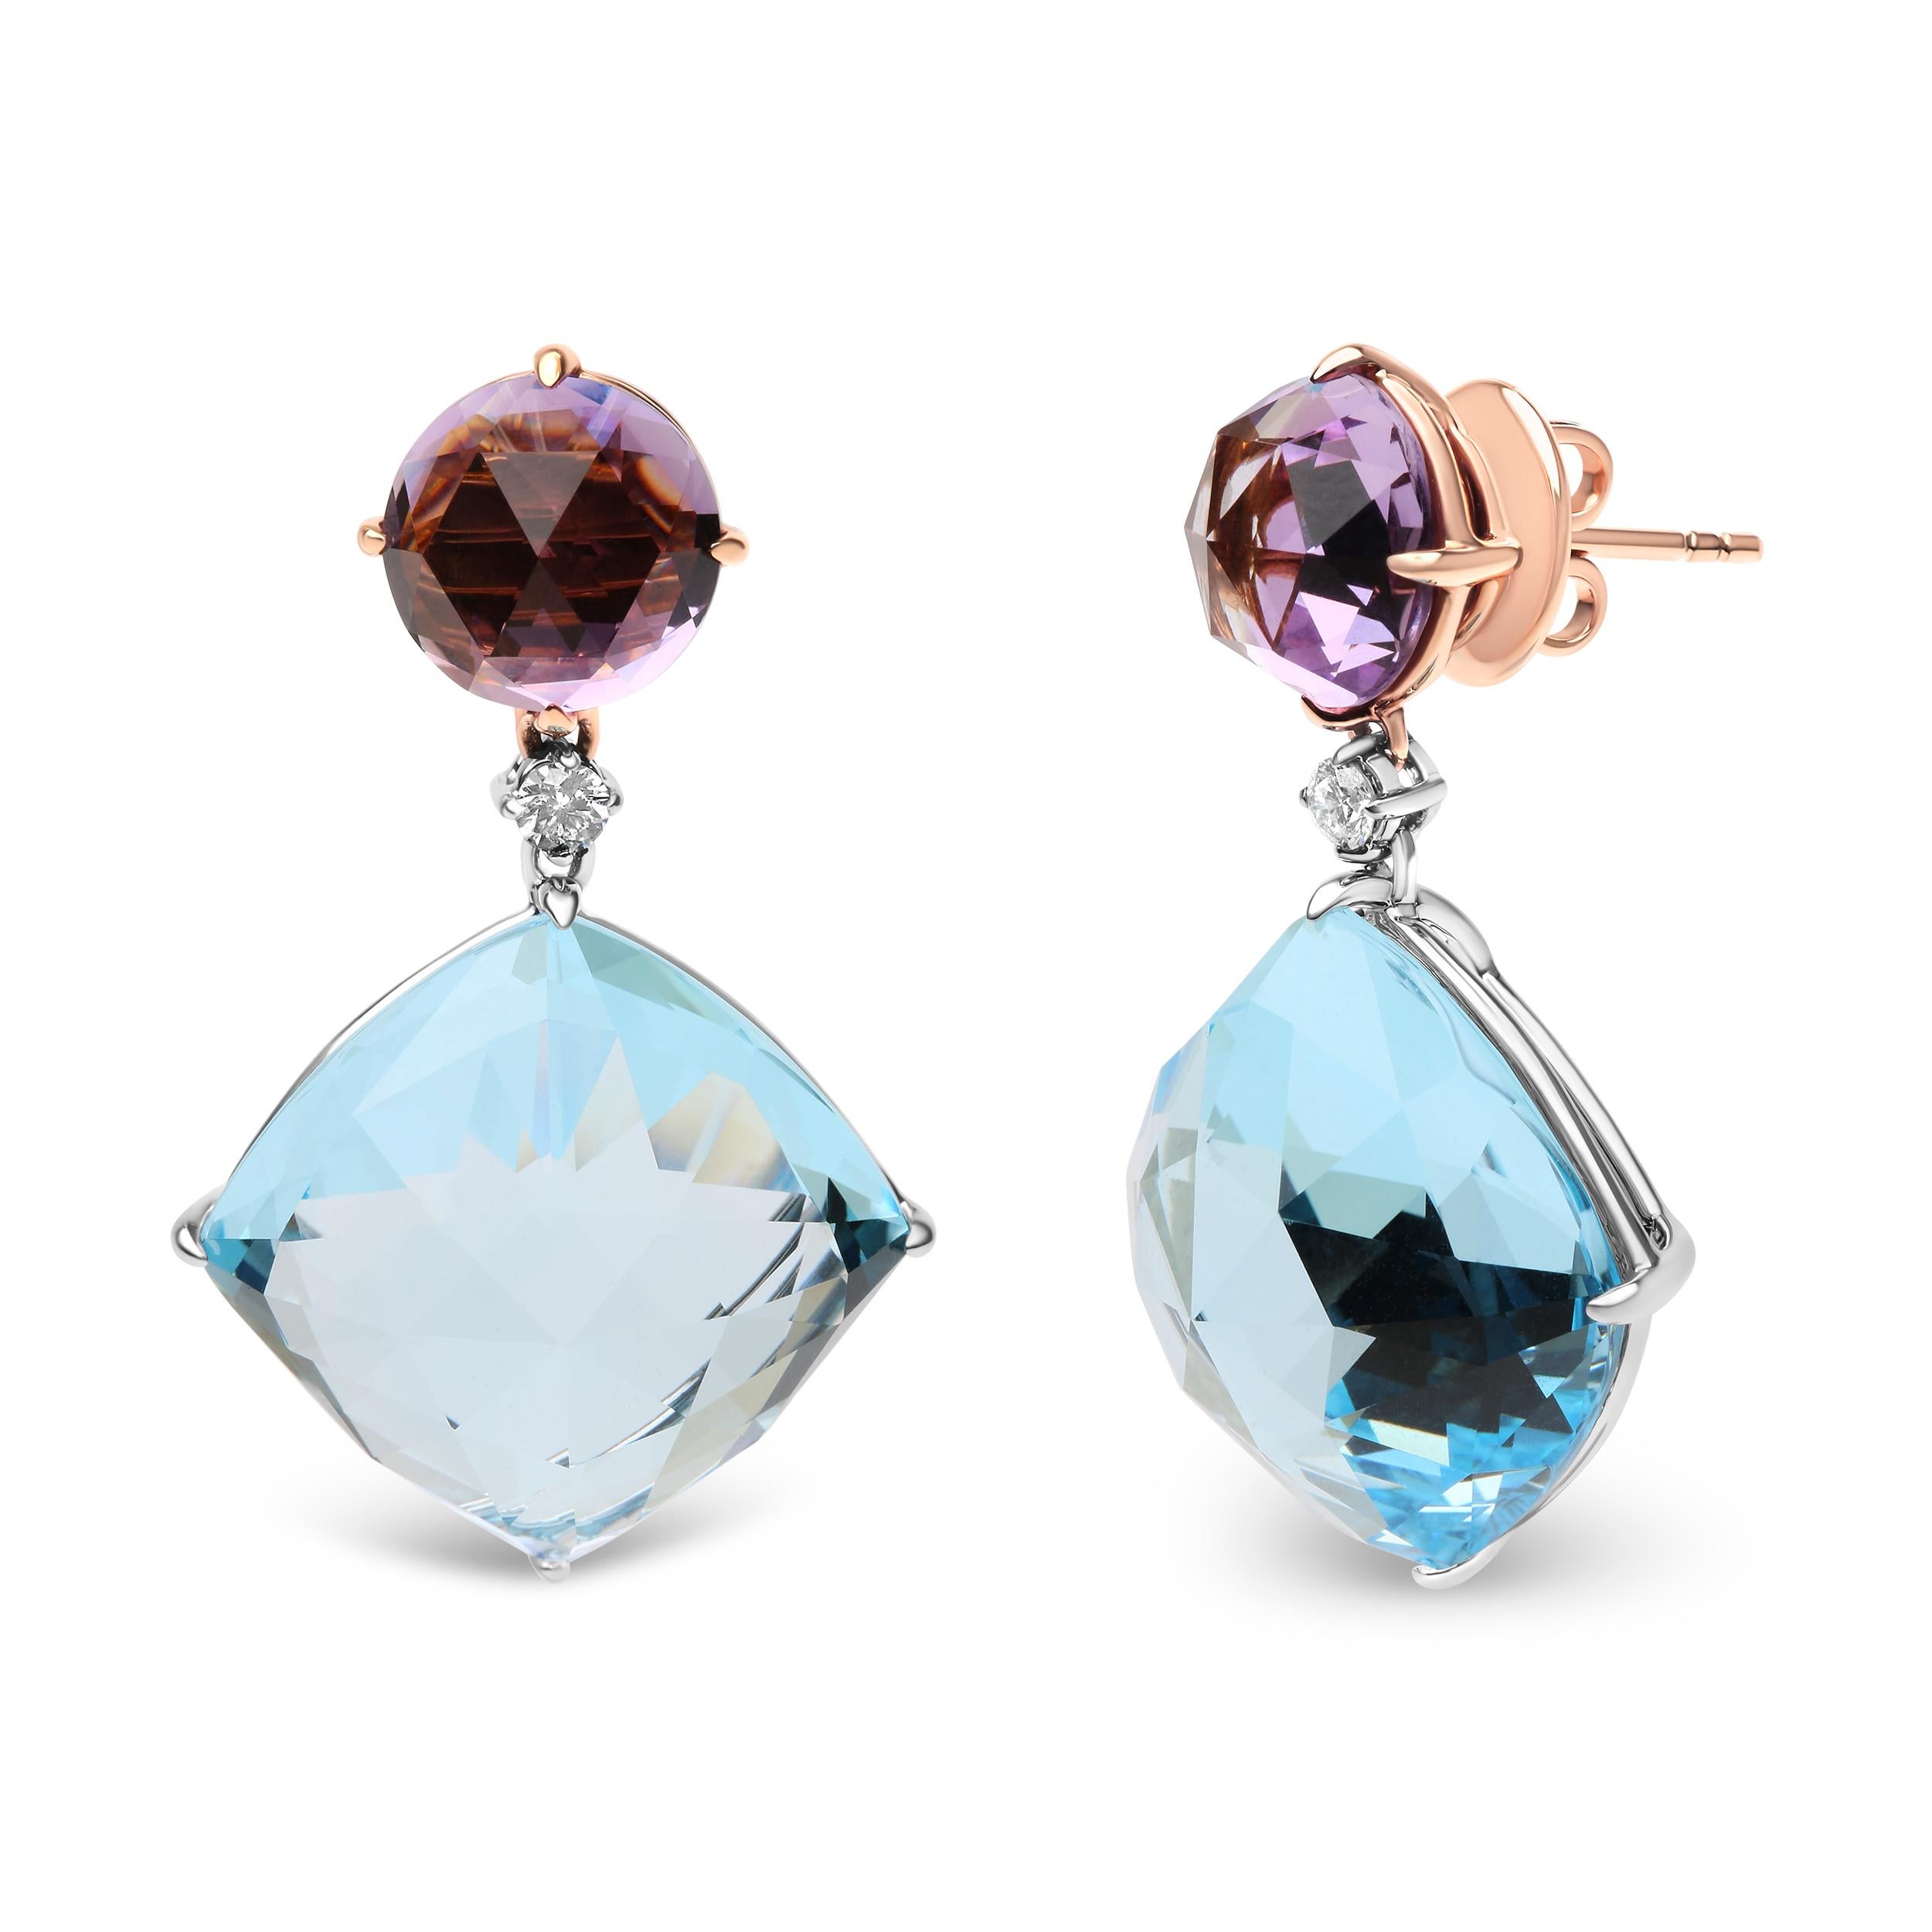 These glamorous 18k white and rose gold dangle earrings will bring you luxurious head-turning sparkle featuring natural gemstones and diamonds that radiate cool glam from prong settings. The look starts off with a 10x10mm round heat-treated pink